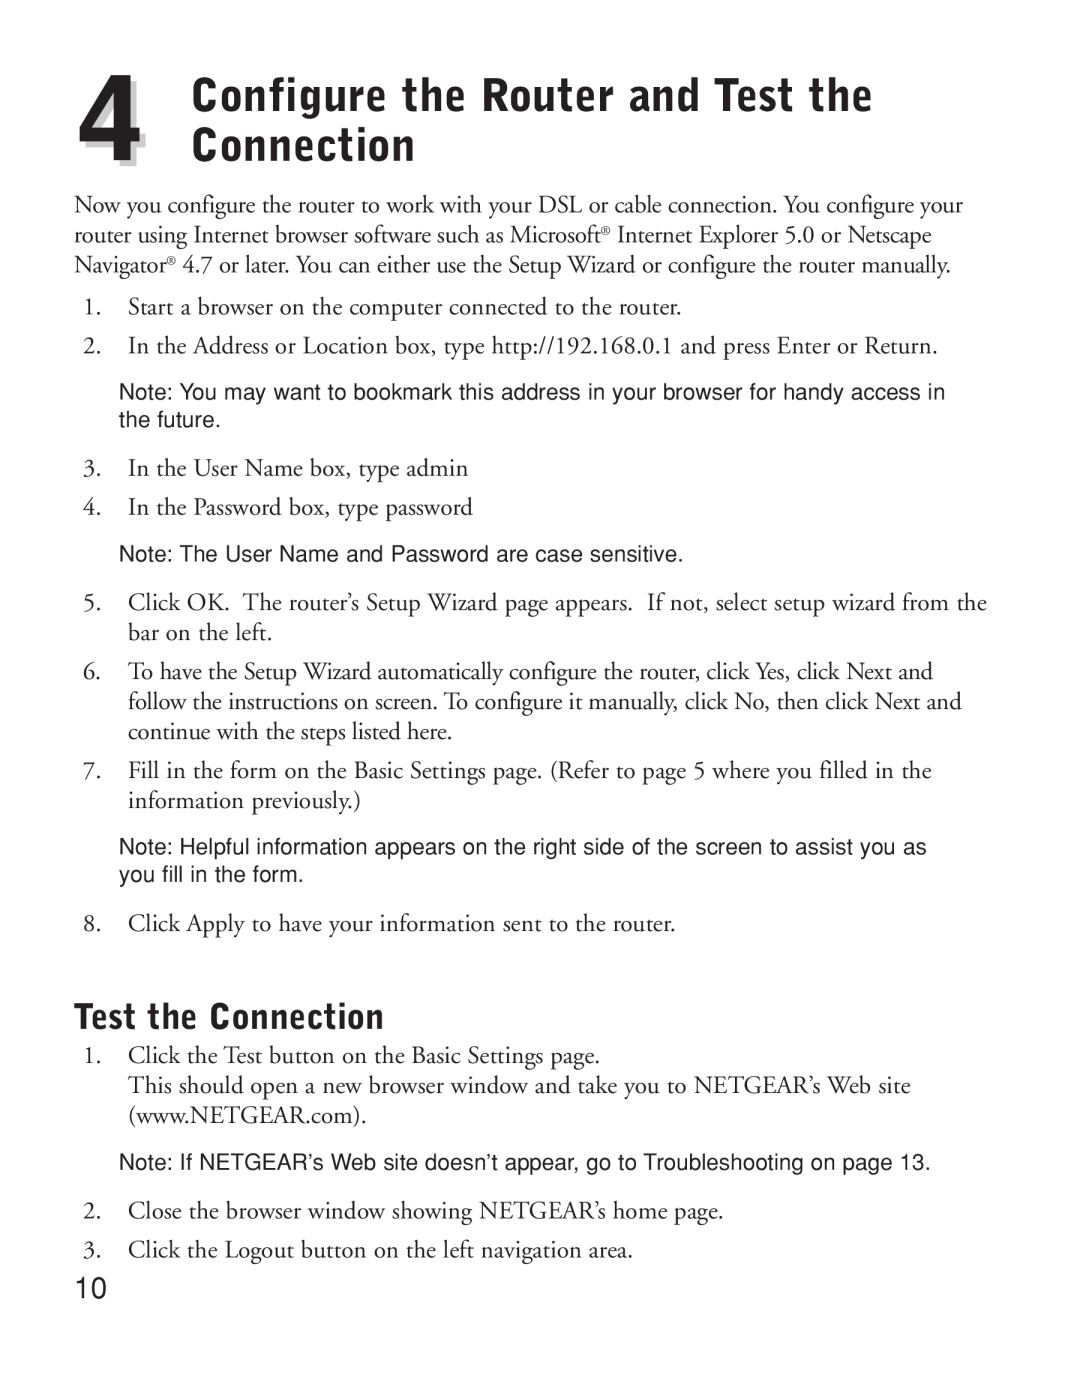 NETGEAR HR314 manual Configure the Router and Test the Connection 